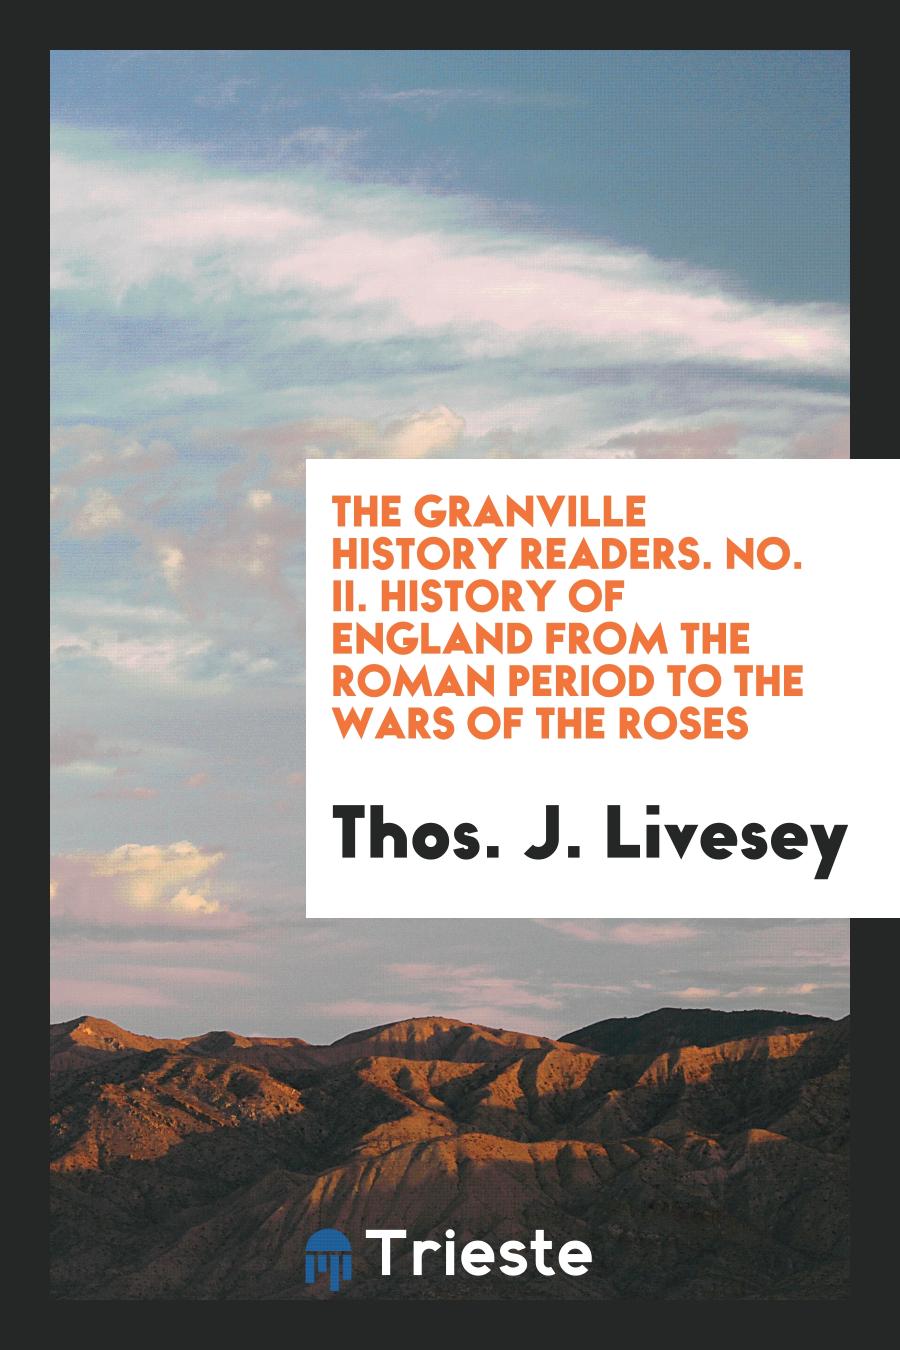 The Granville History Readers. No. II. History of England from the Roman Period to the Wars of the Roses